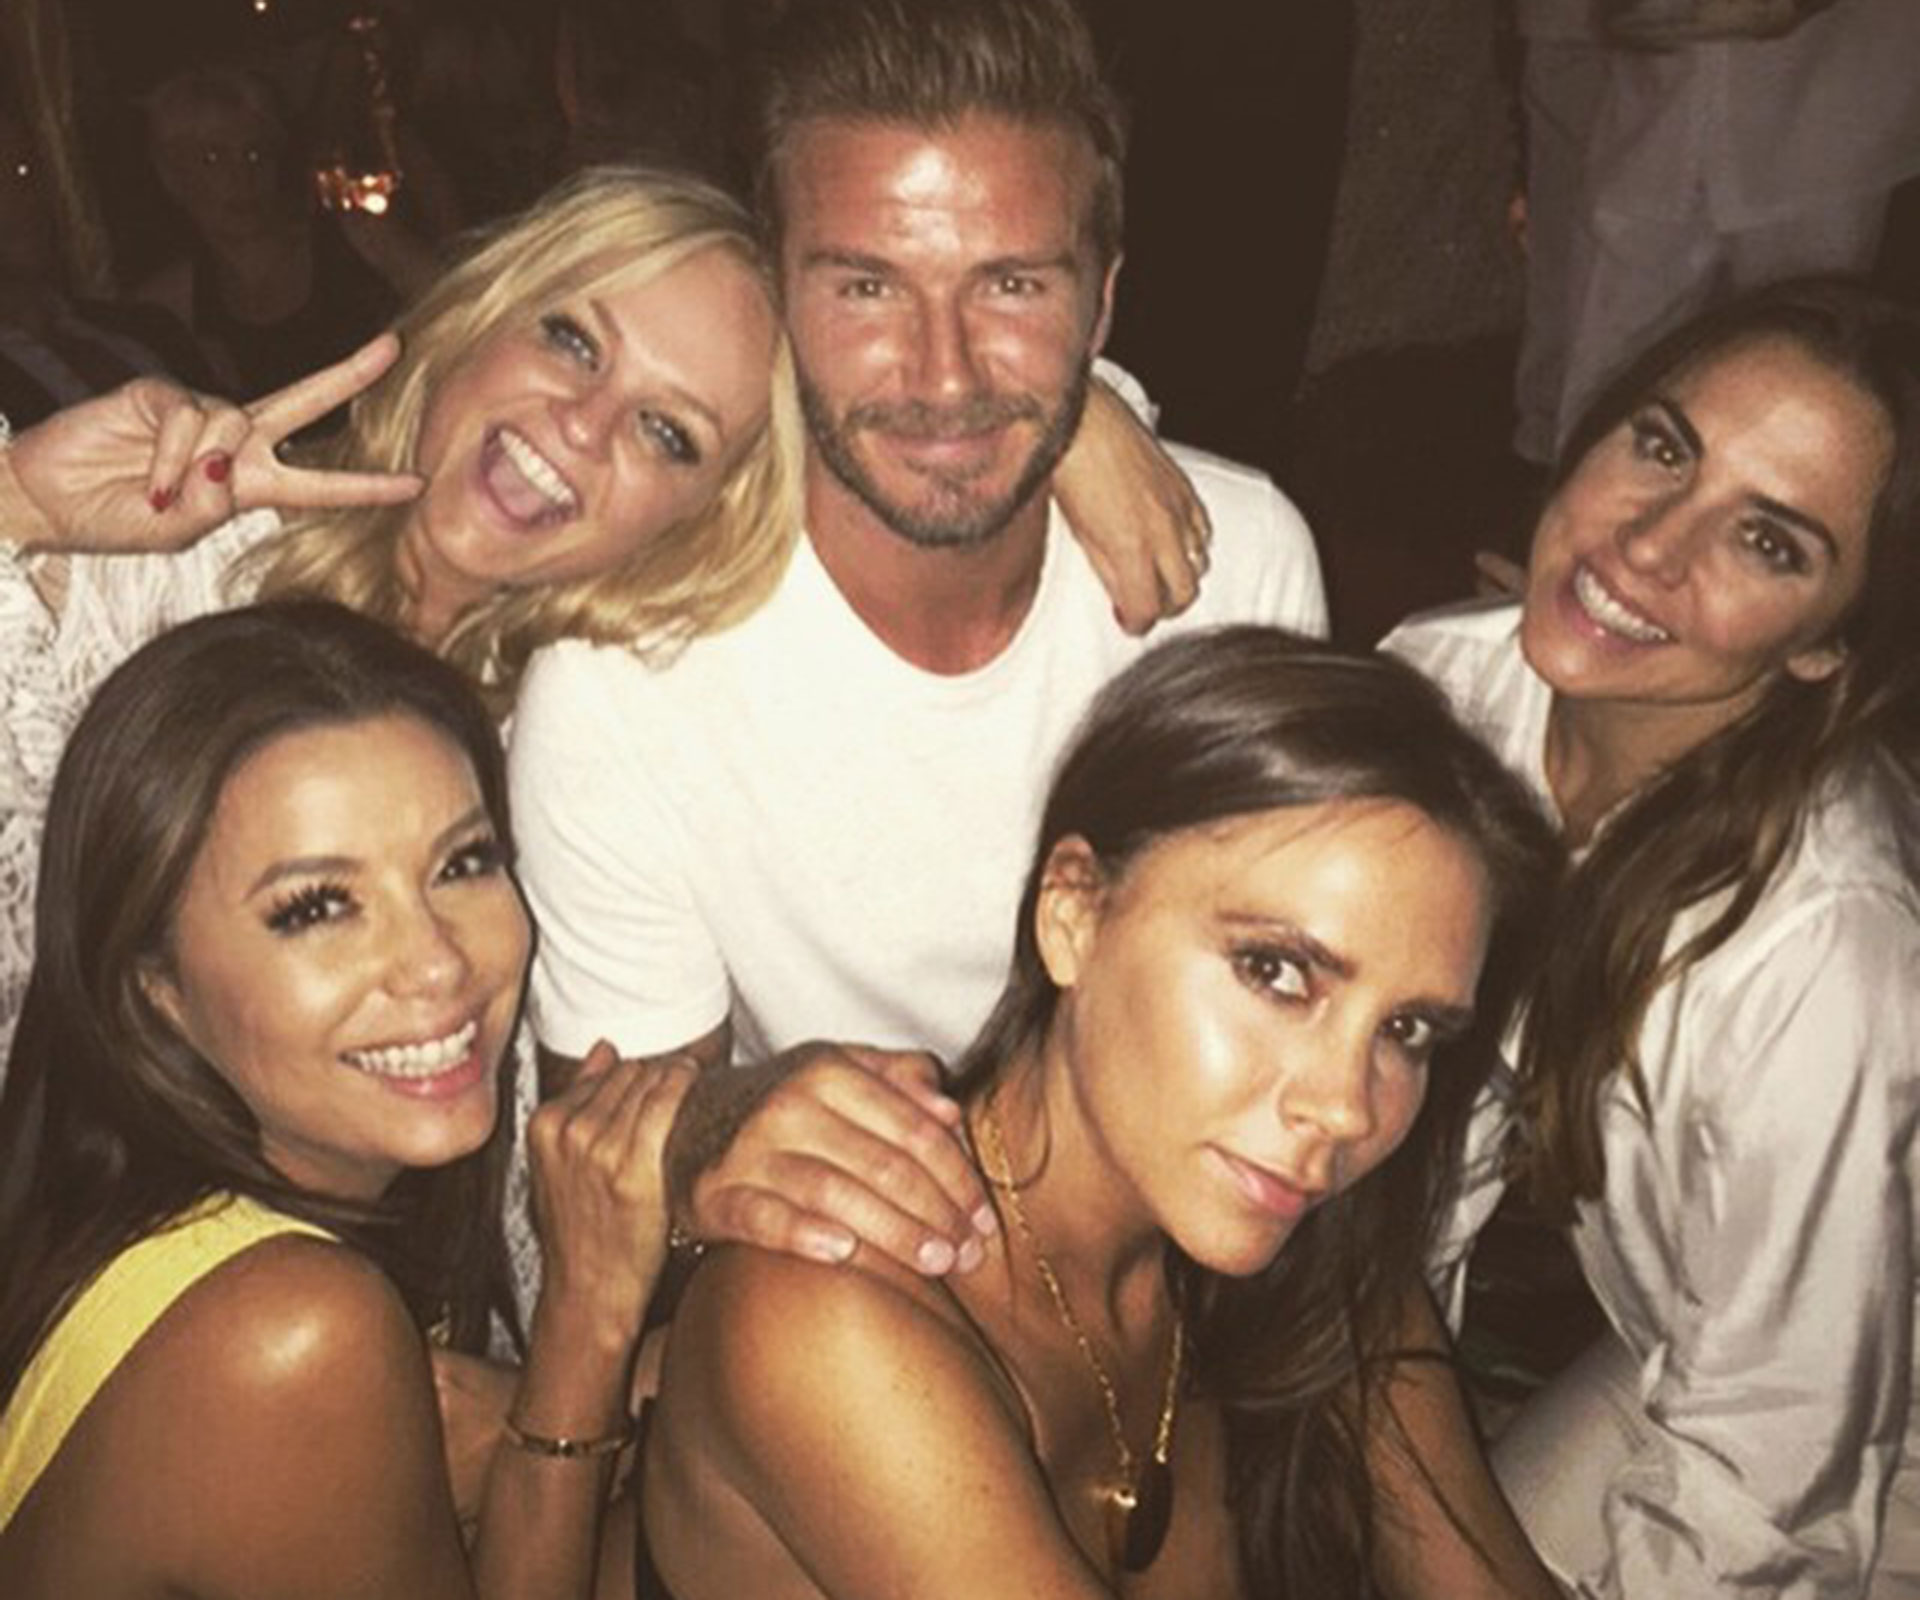 The party of the century! David Beckham celebrates 40th with star-studded bash in Marrakech